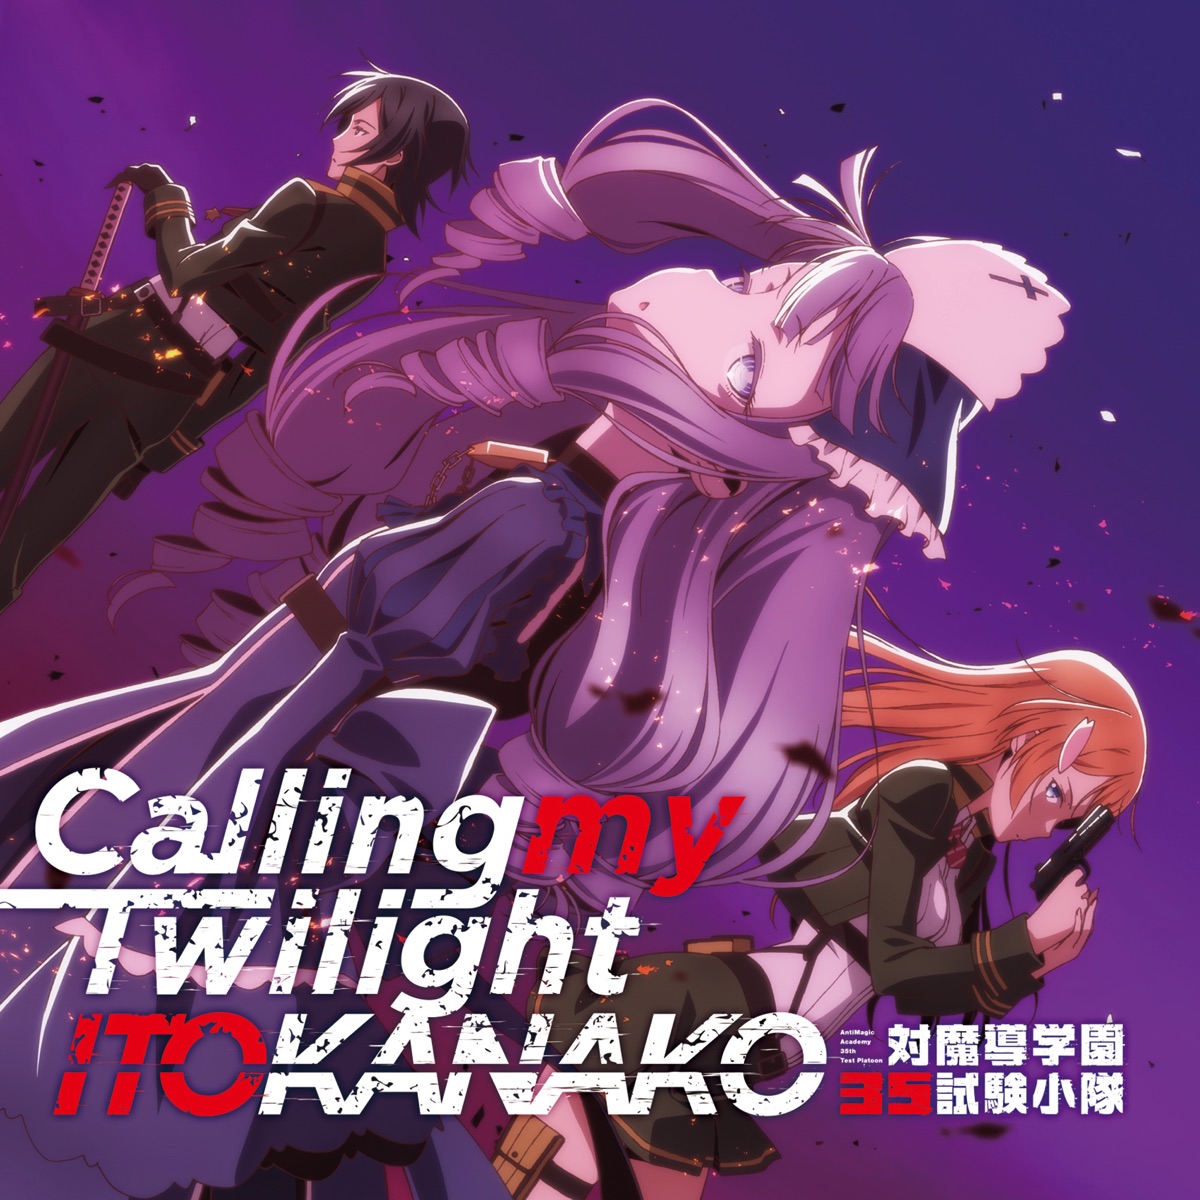 Cover art for『Kanako Ito - Calling my Twilight』from the release『Calling my Twilight』